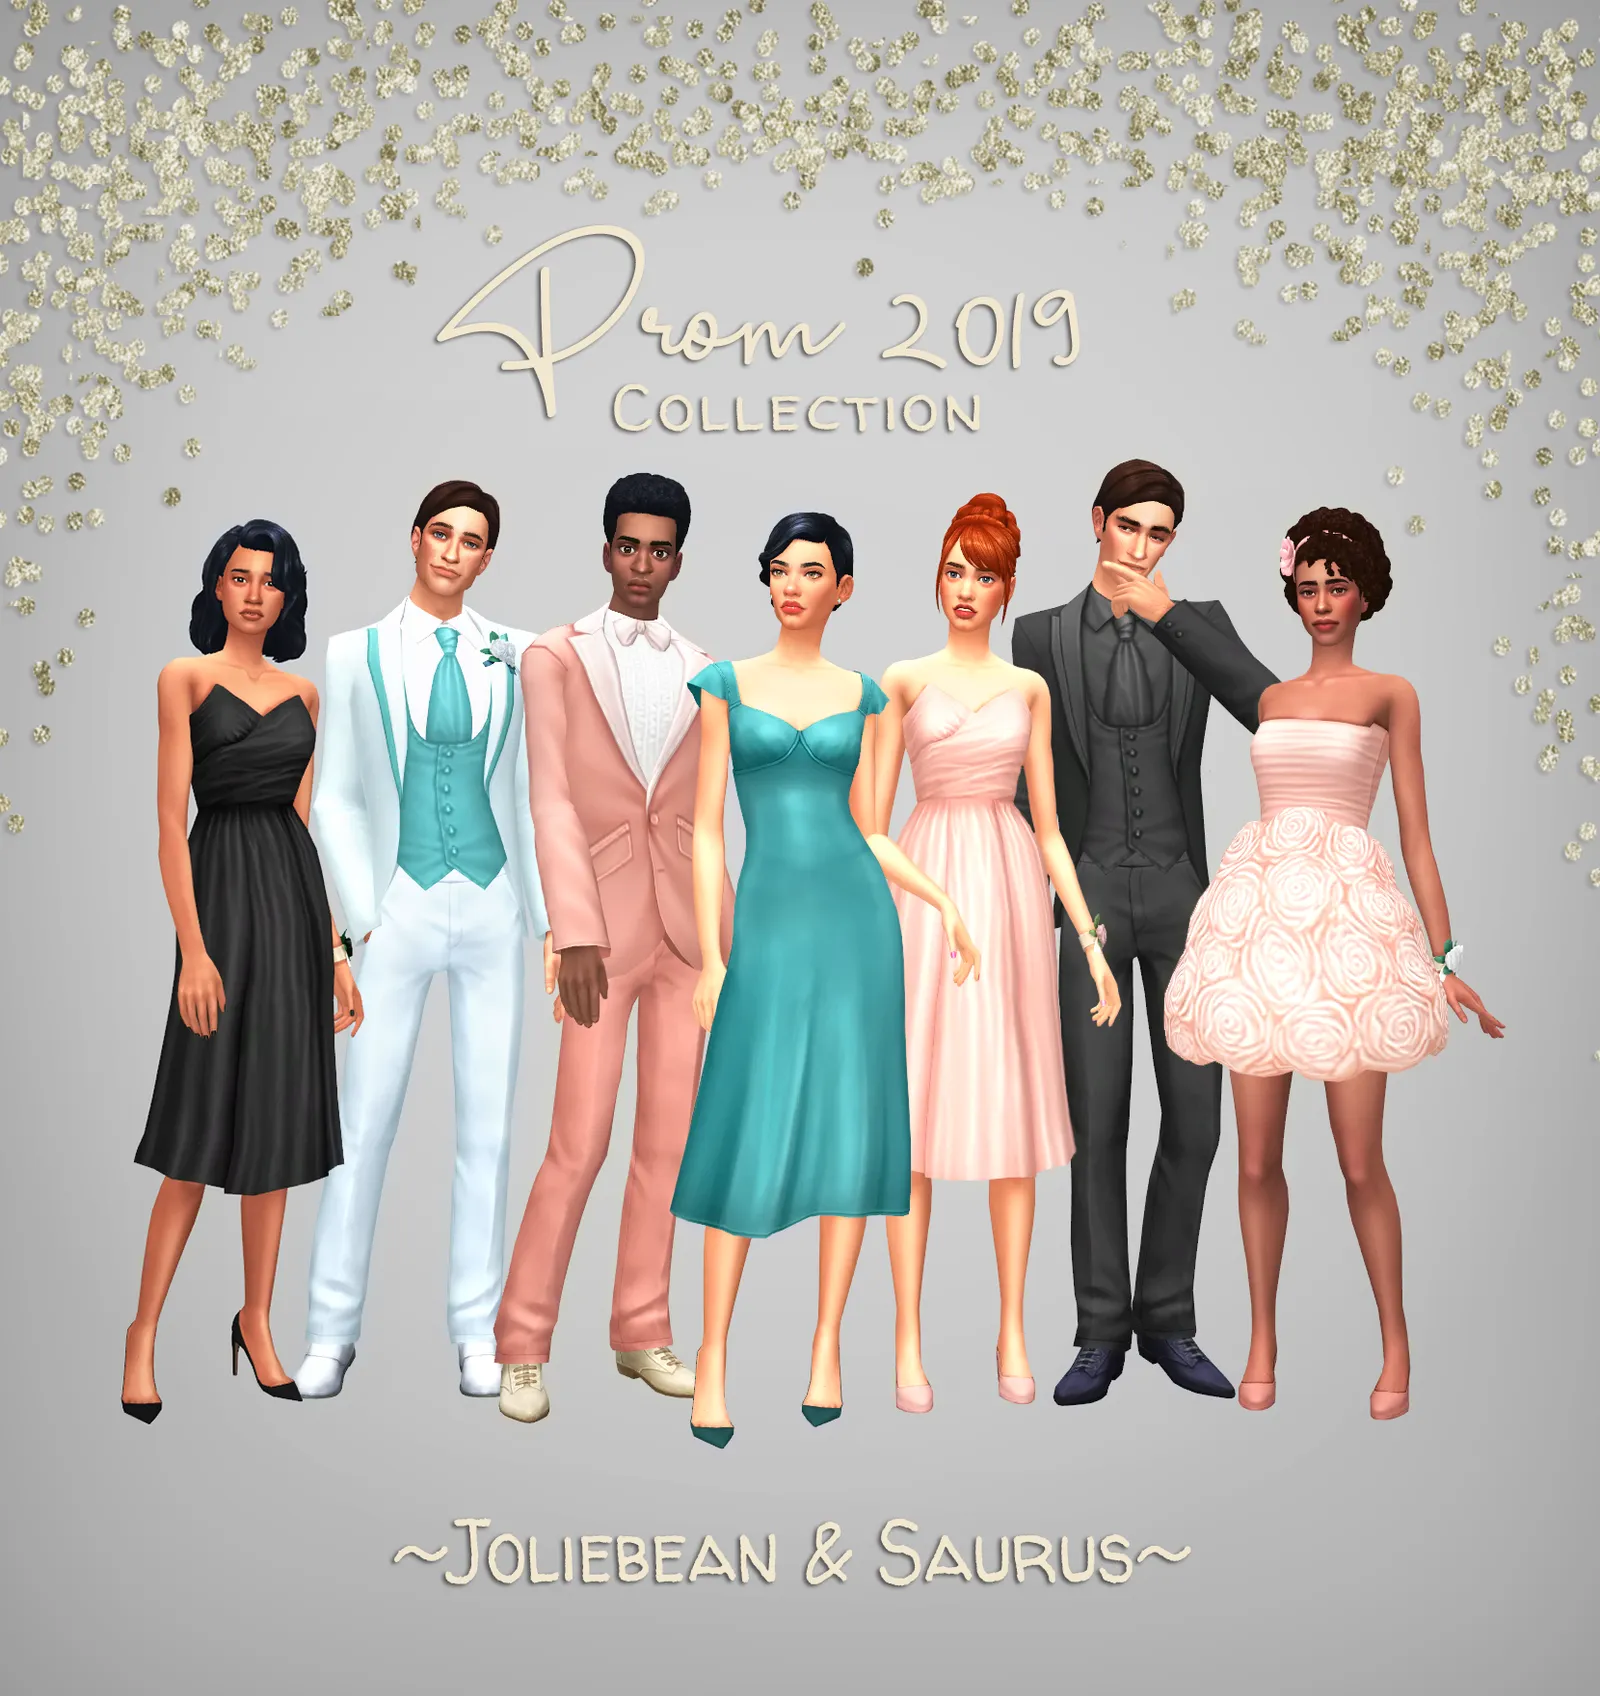 Prom 2019 Collection by @joliebean?? & @saurussims??